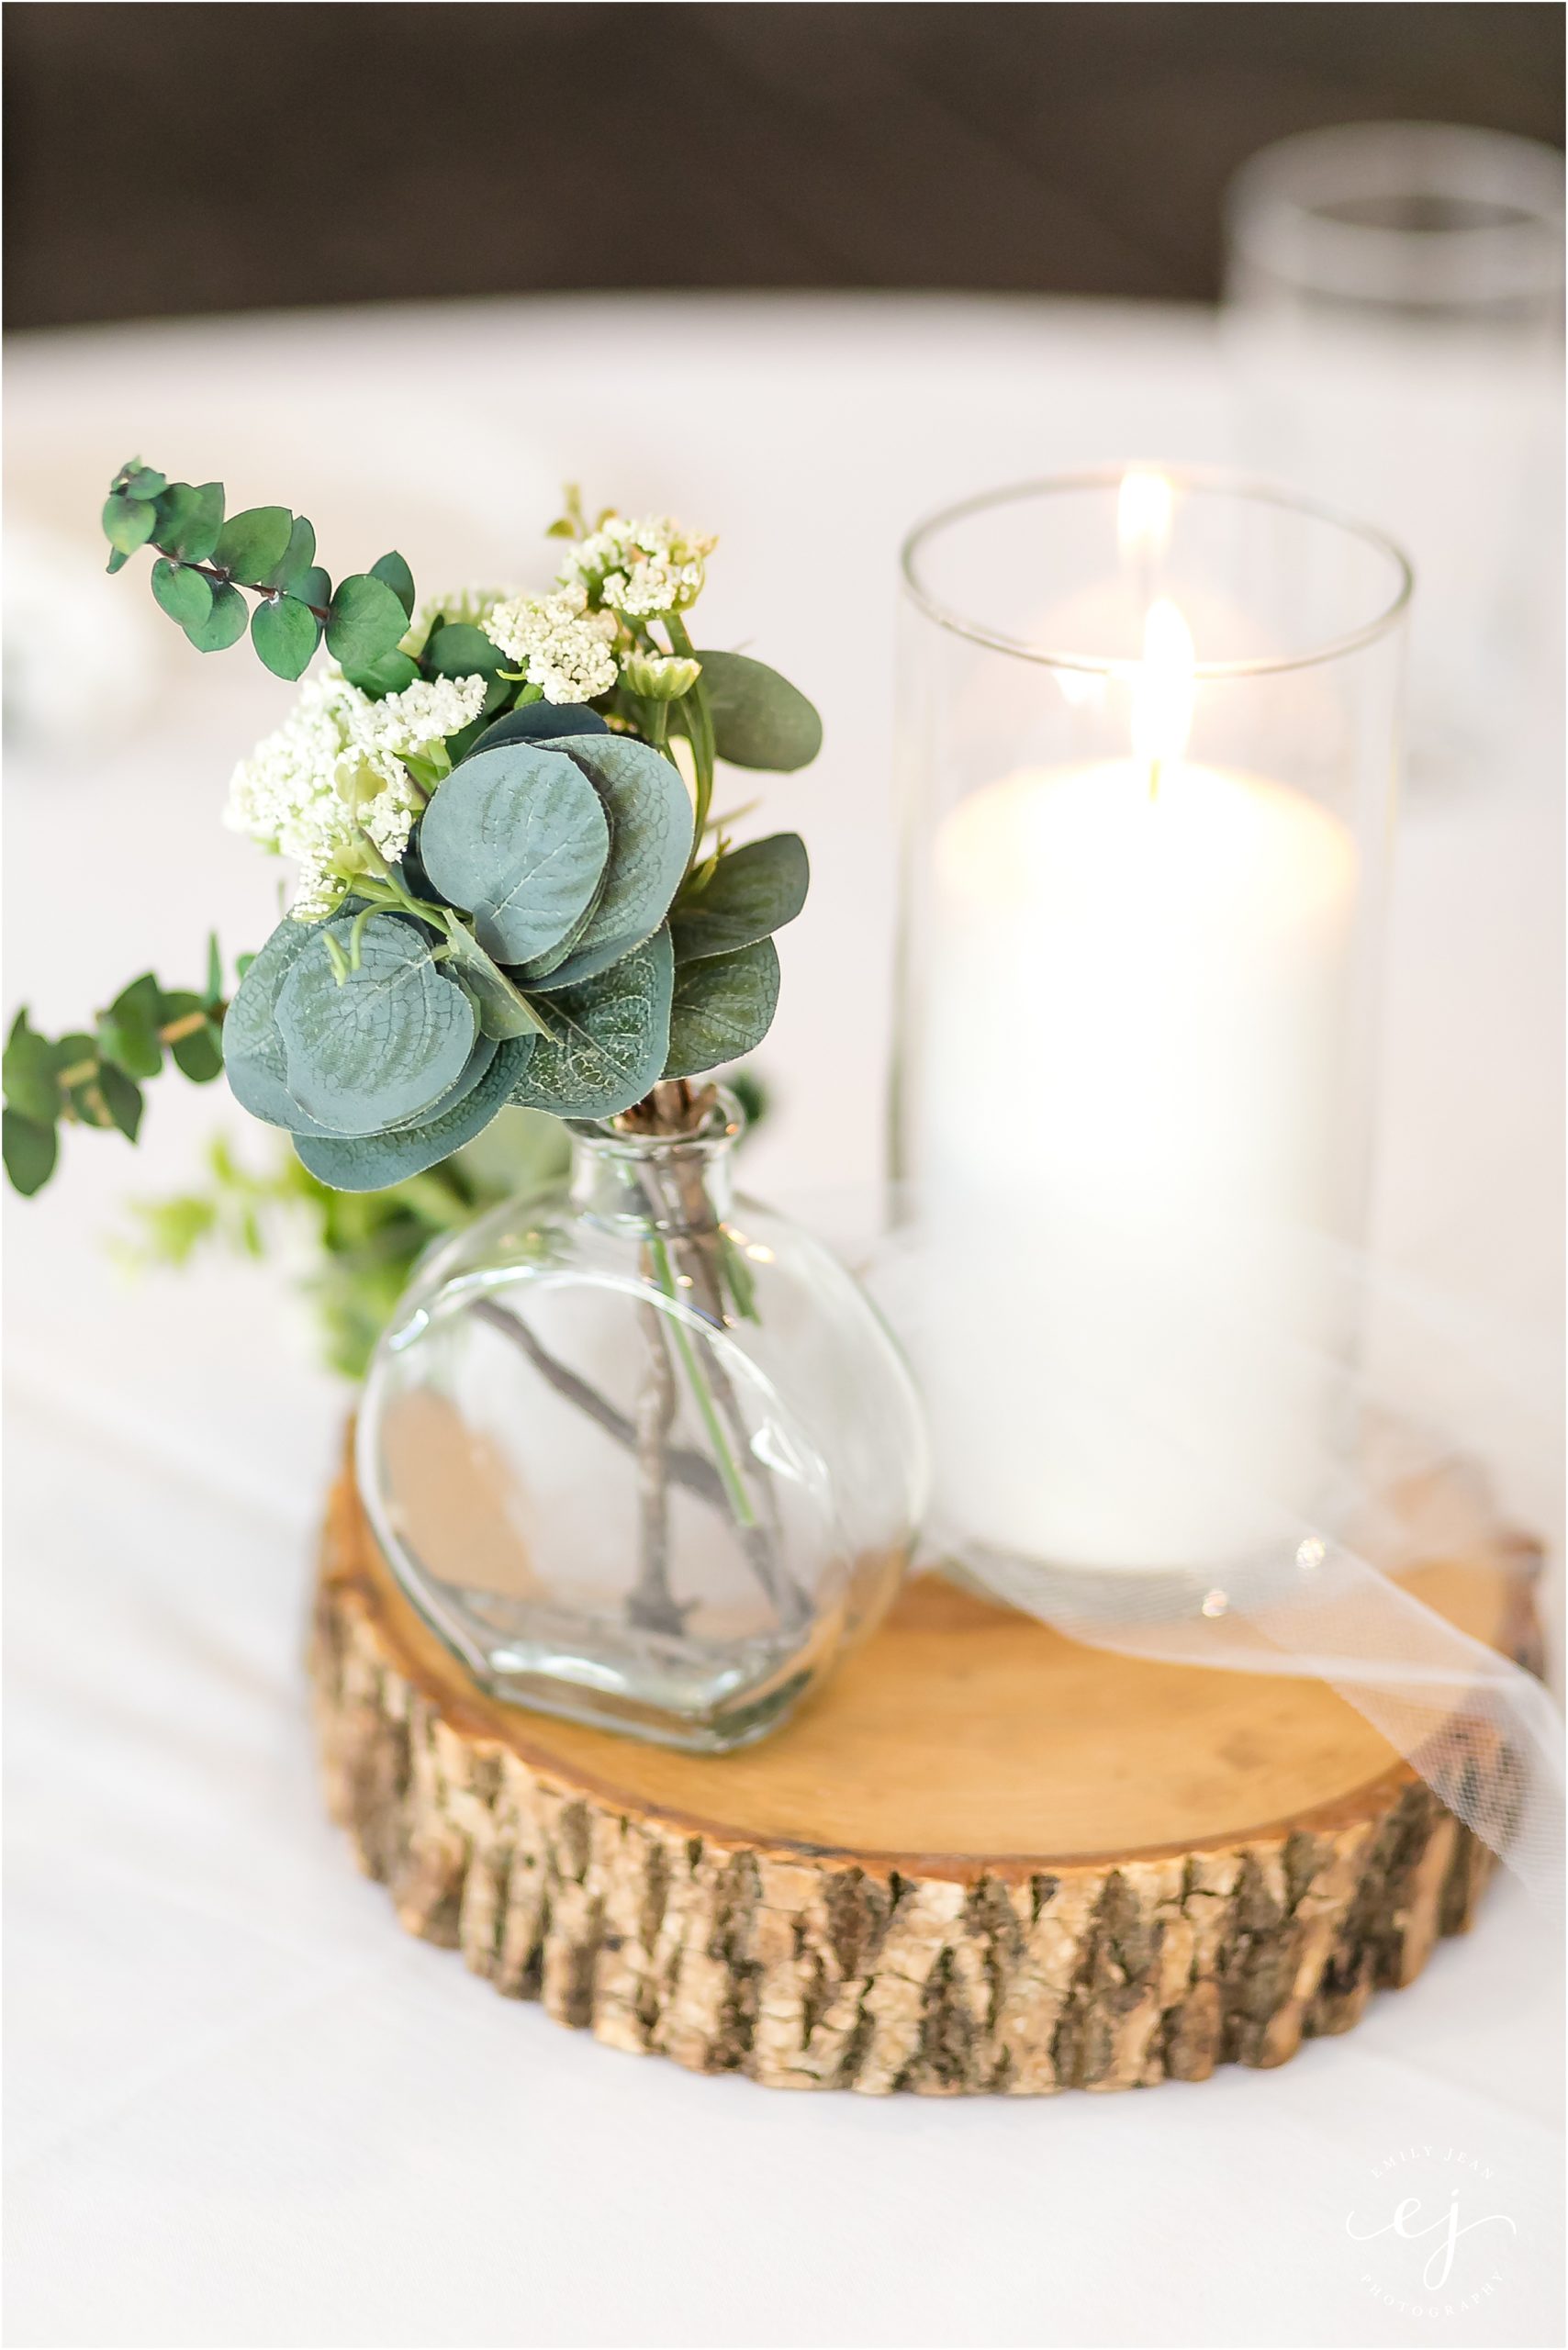 simple rustic table centerpiece with greenery in glass jar